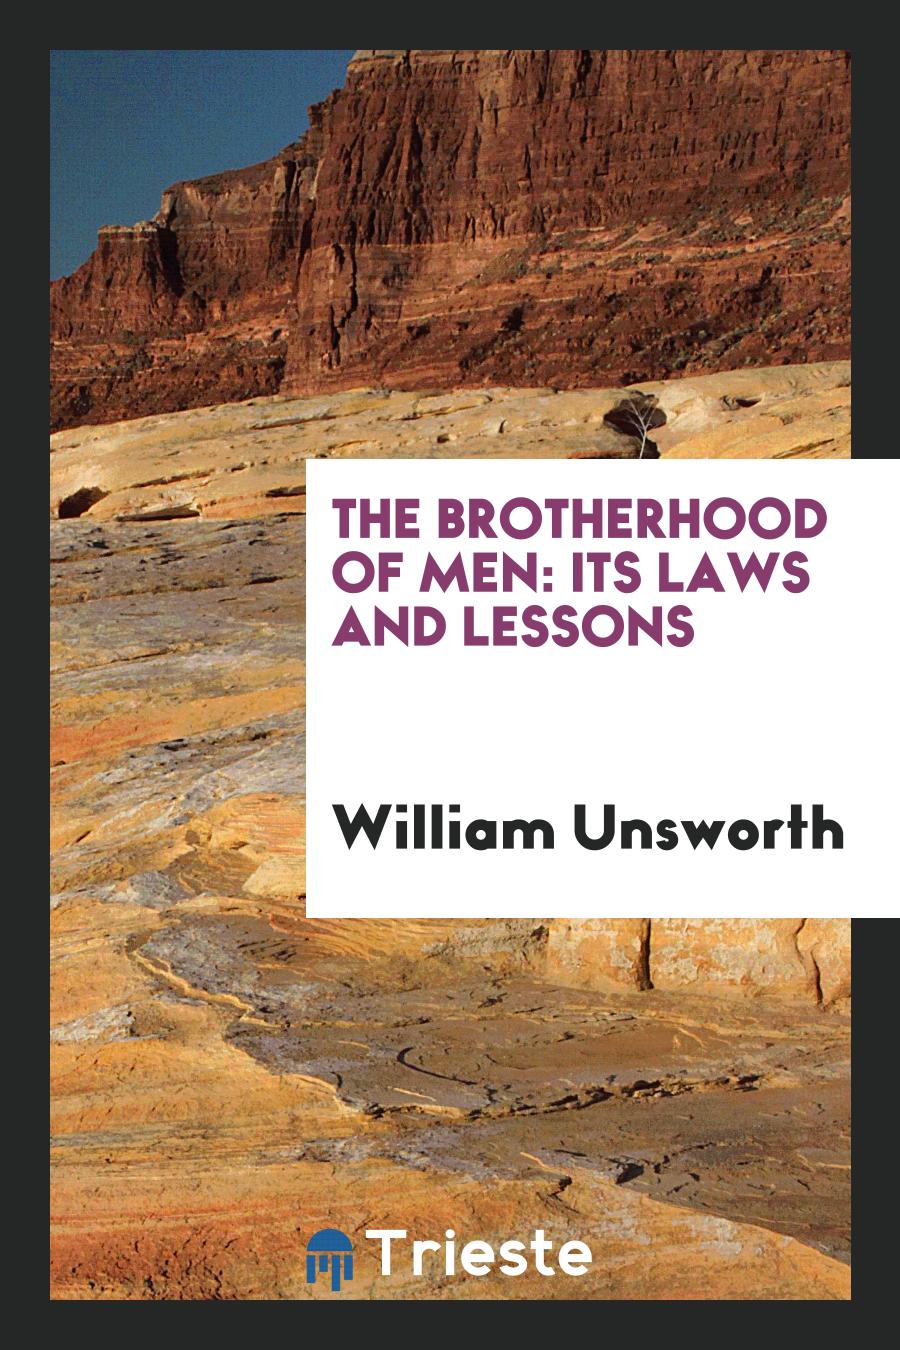 The Brotherhood of Men: Its Laws and Lessons